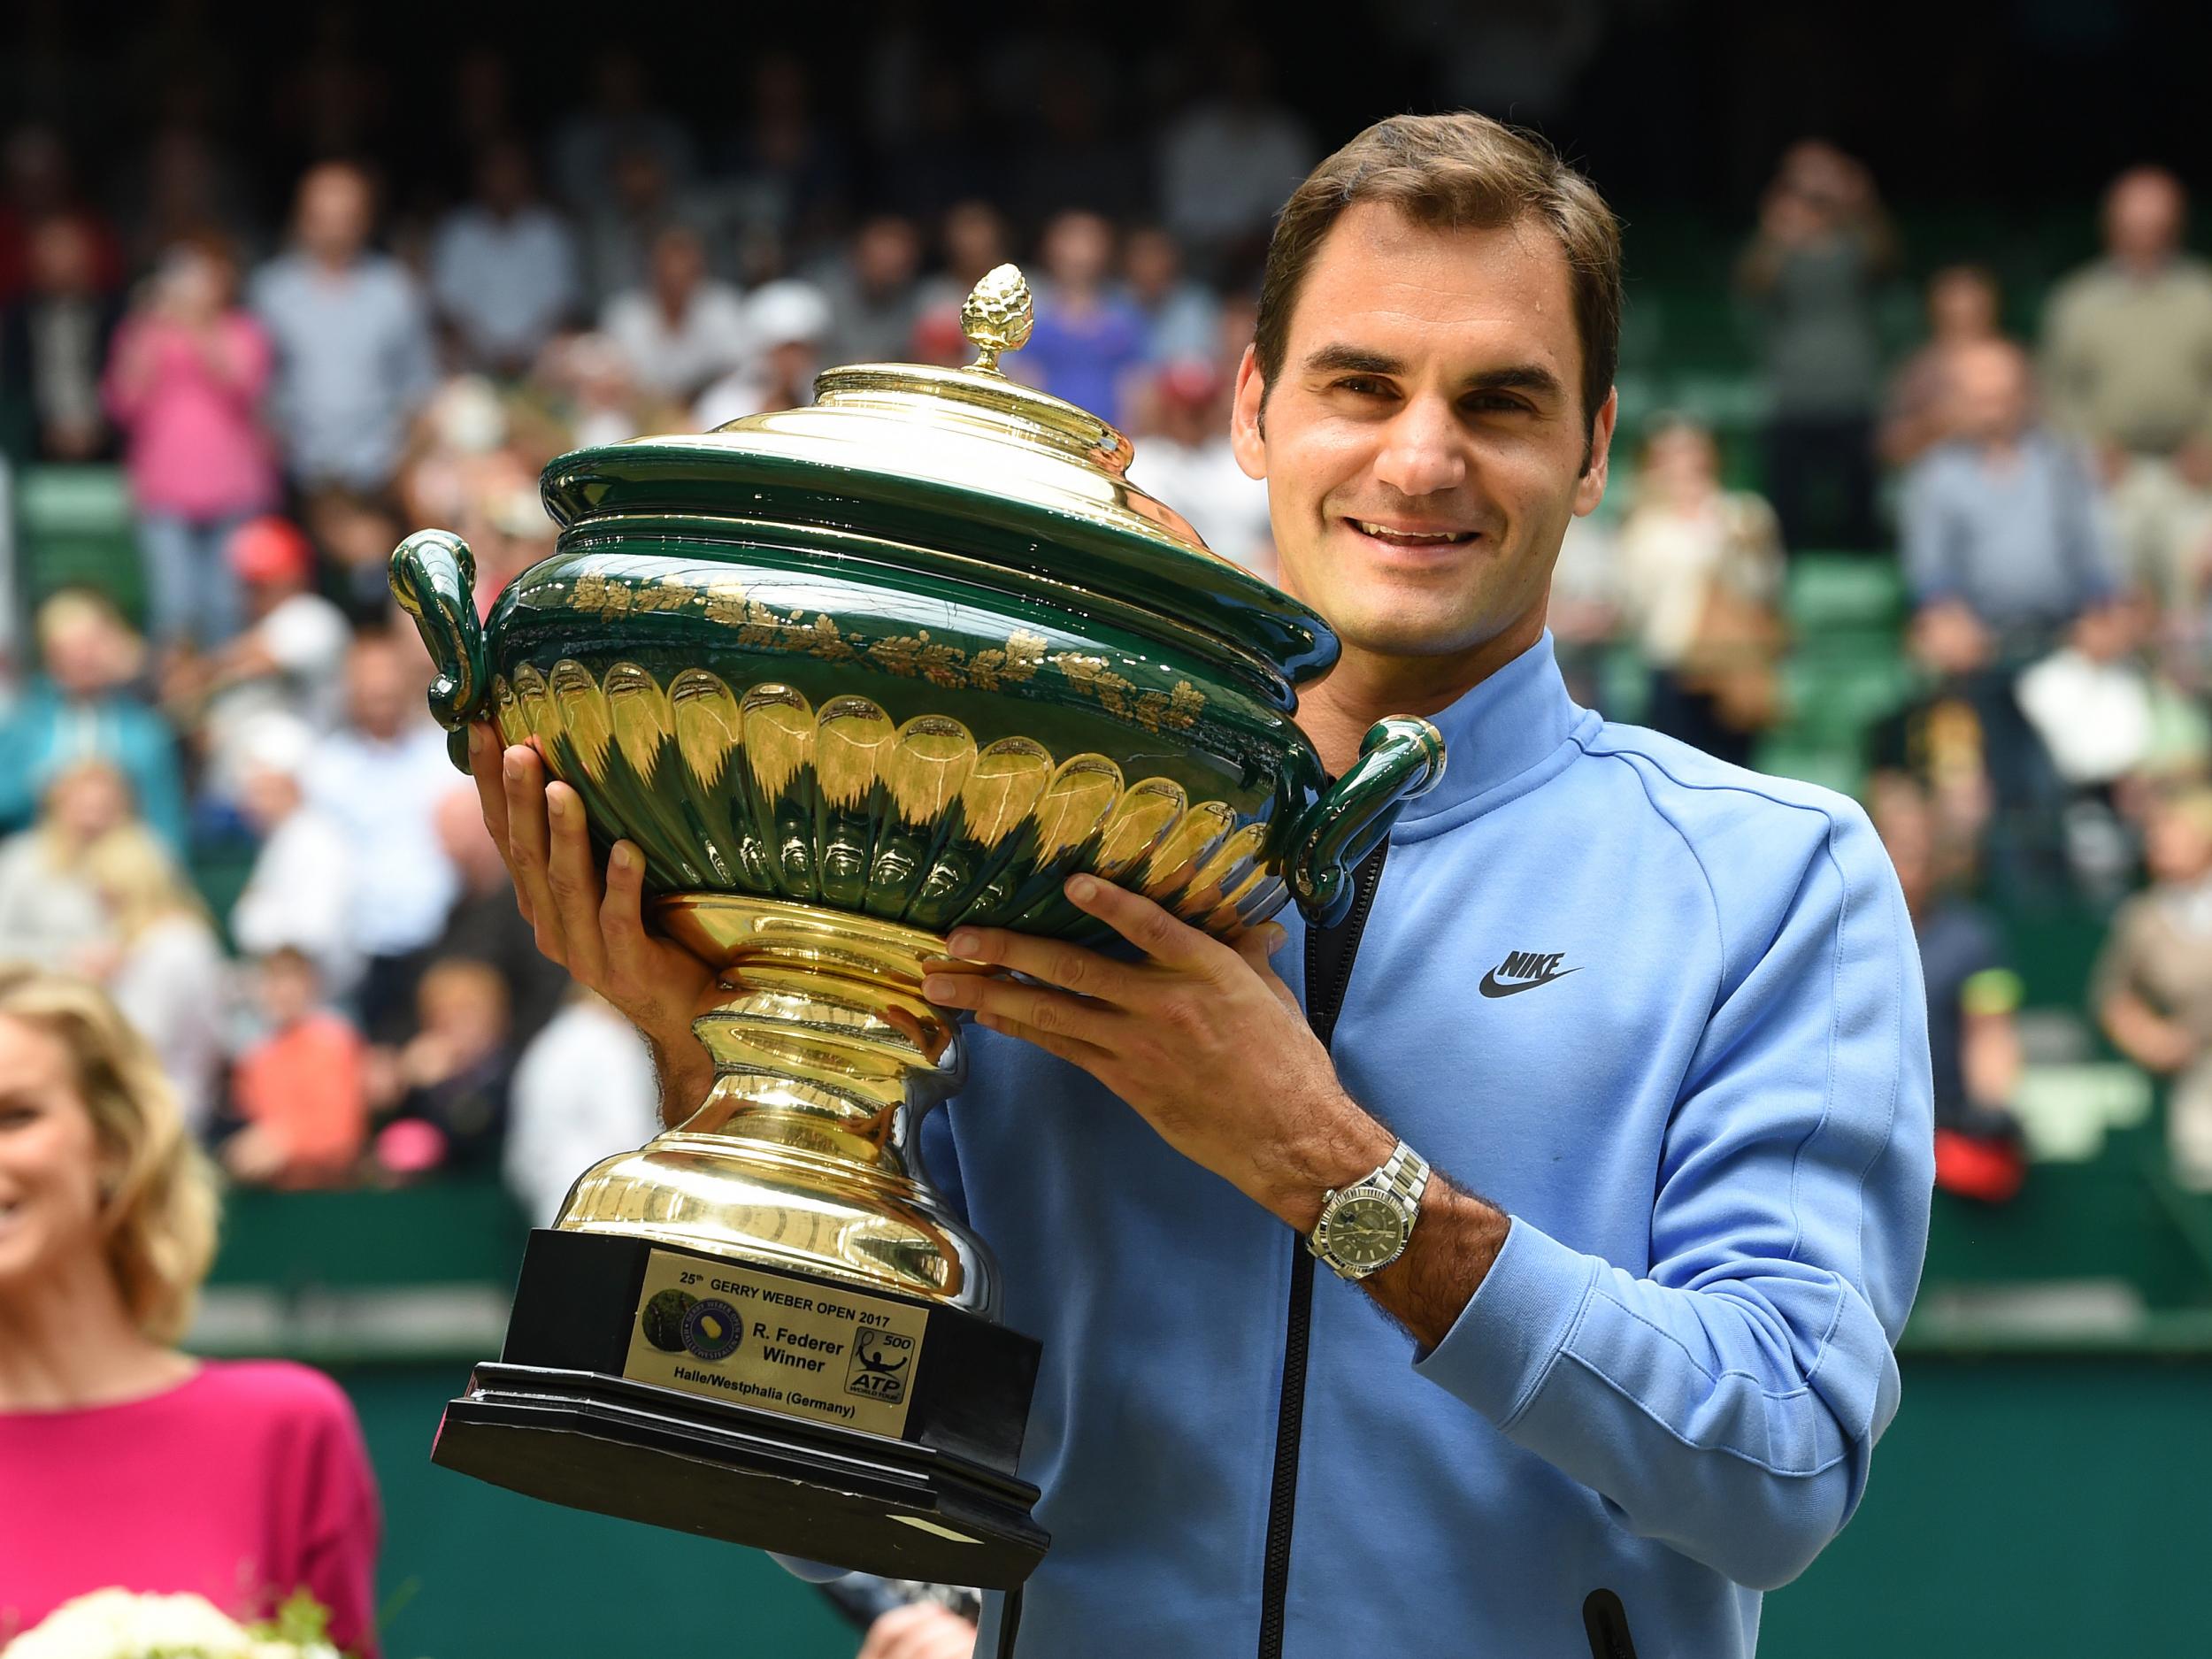 It took Federer less than an hour to win his ninth title at Halle